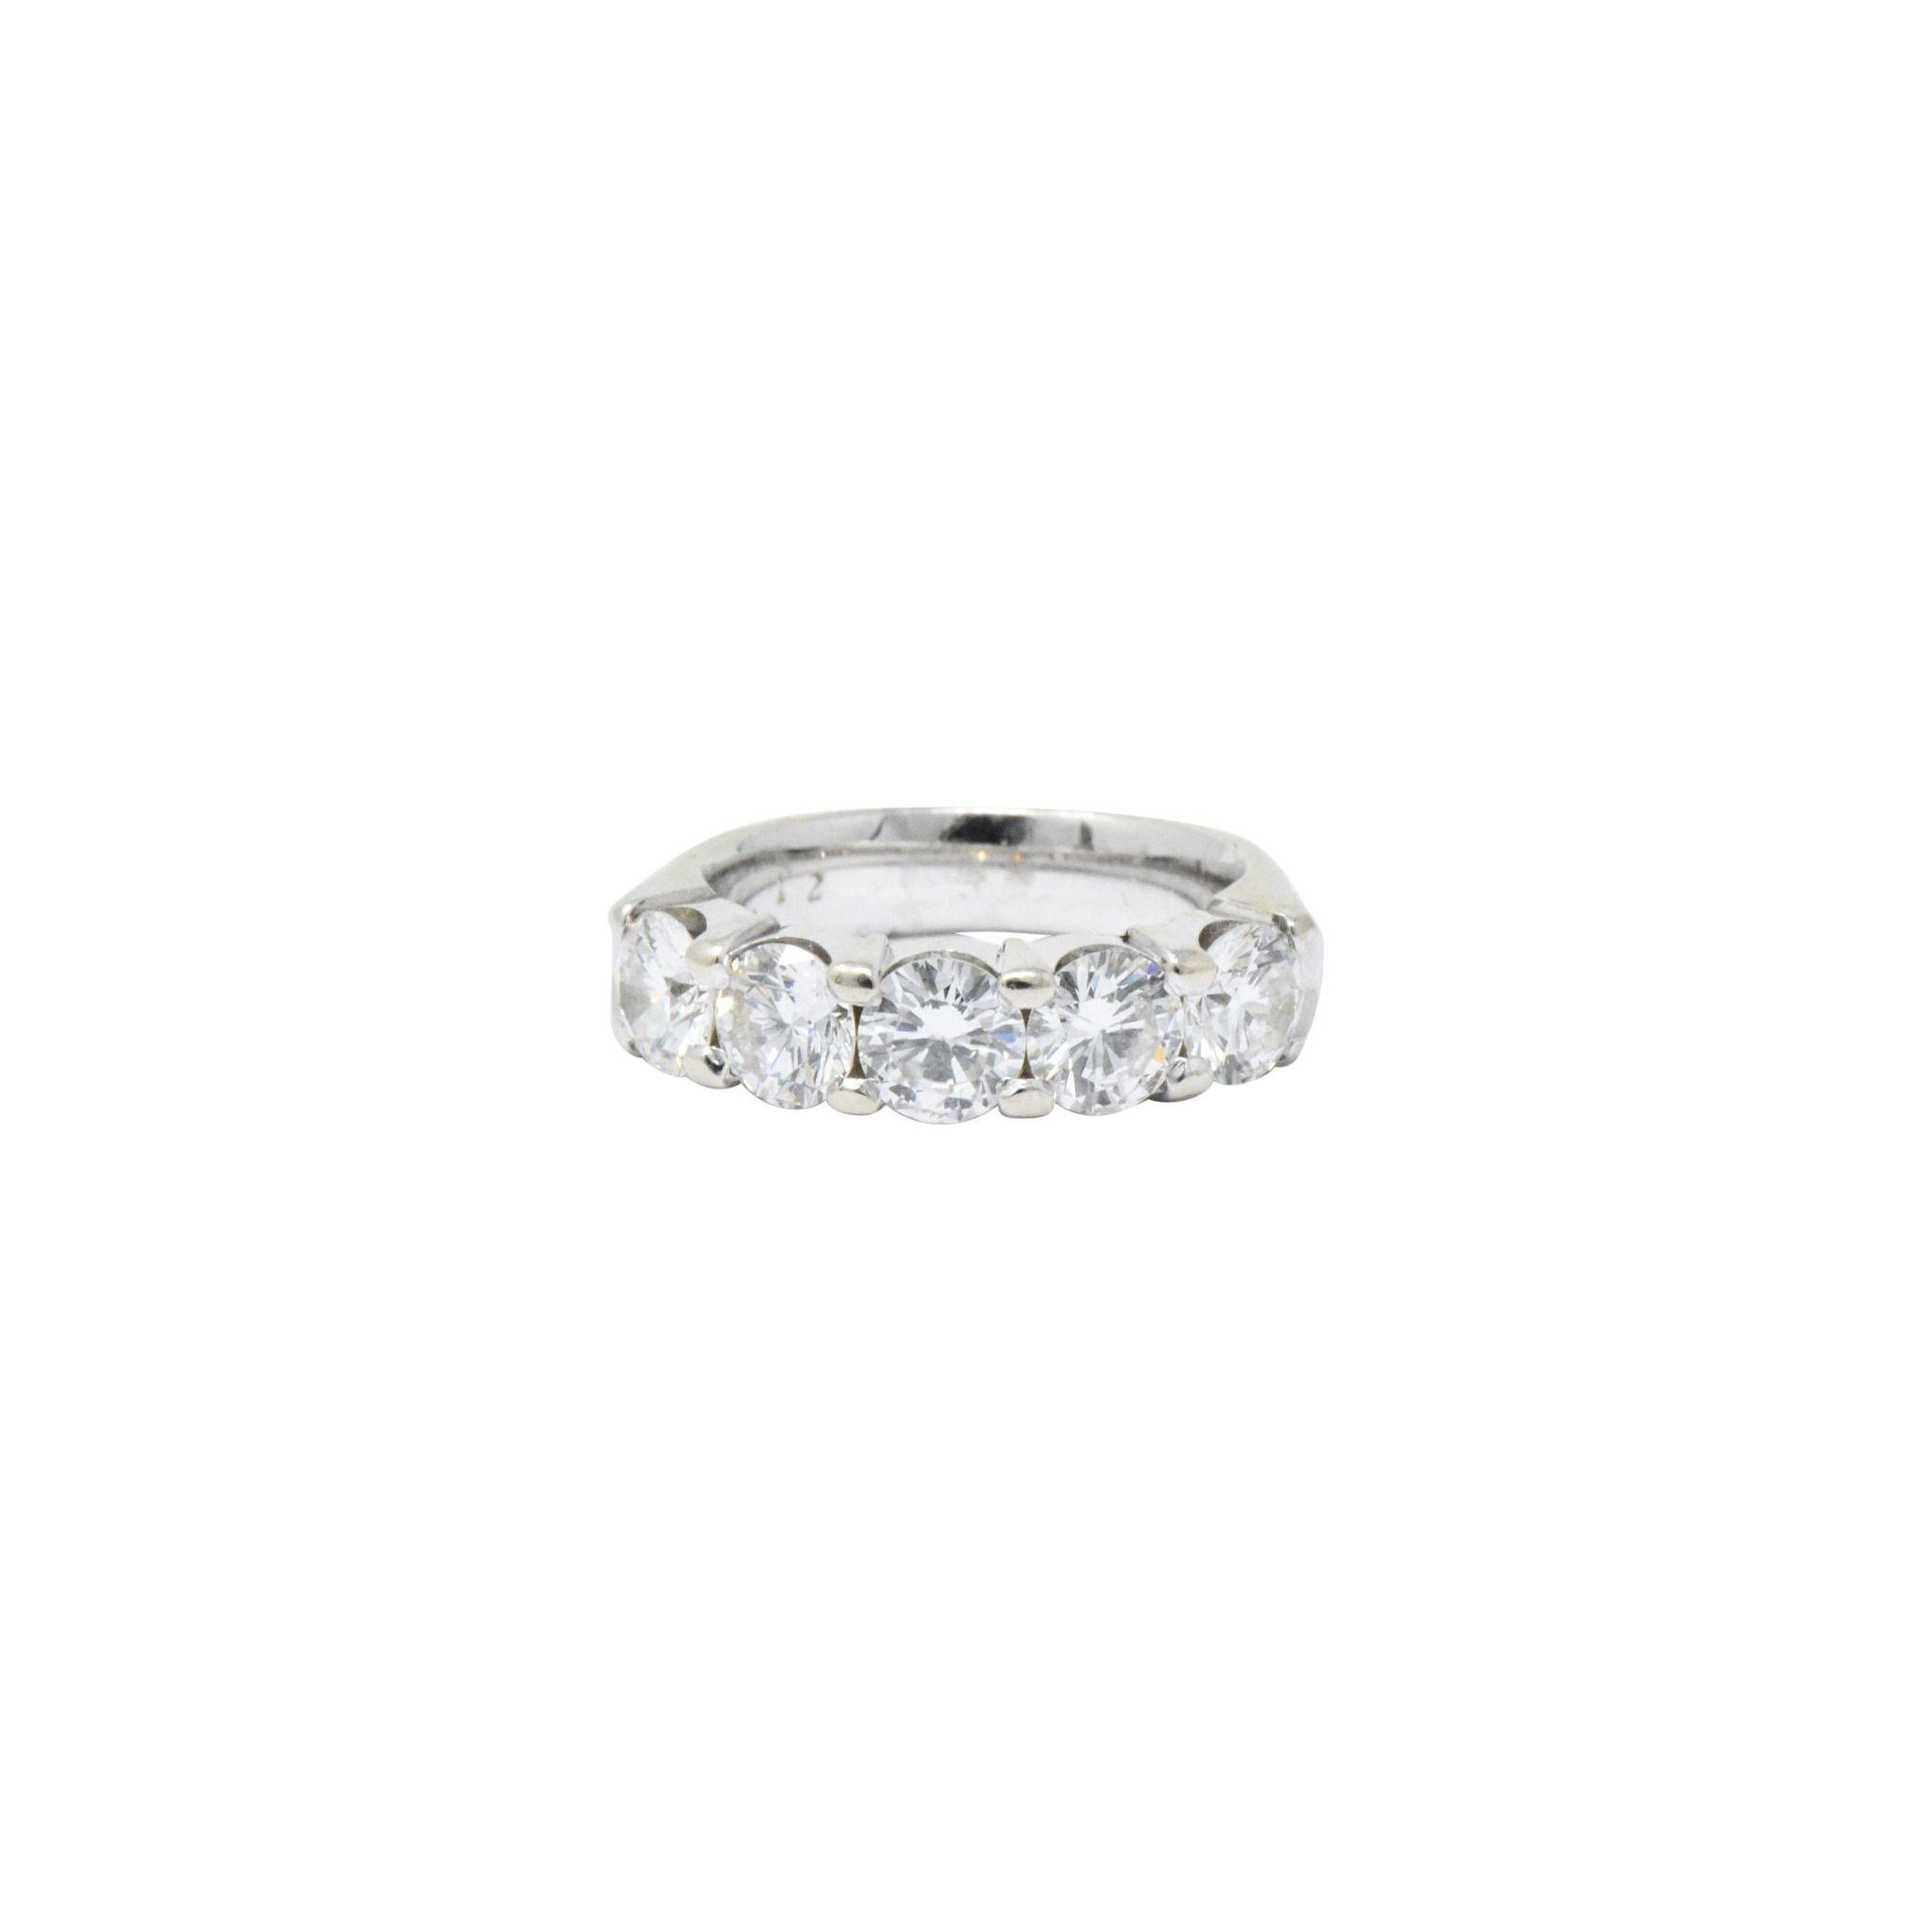 Five stone diamond ring. The ring is set in thick 14K white gold. There are five shared prong round brilliant diamonds encompassing the front of the ring. 2.20 total carat weight, G-H color and VS clarity. The ring is 5 mm wide.
 

Ring Size: 4 1/2